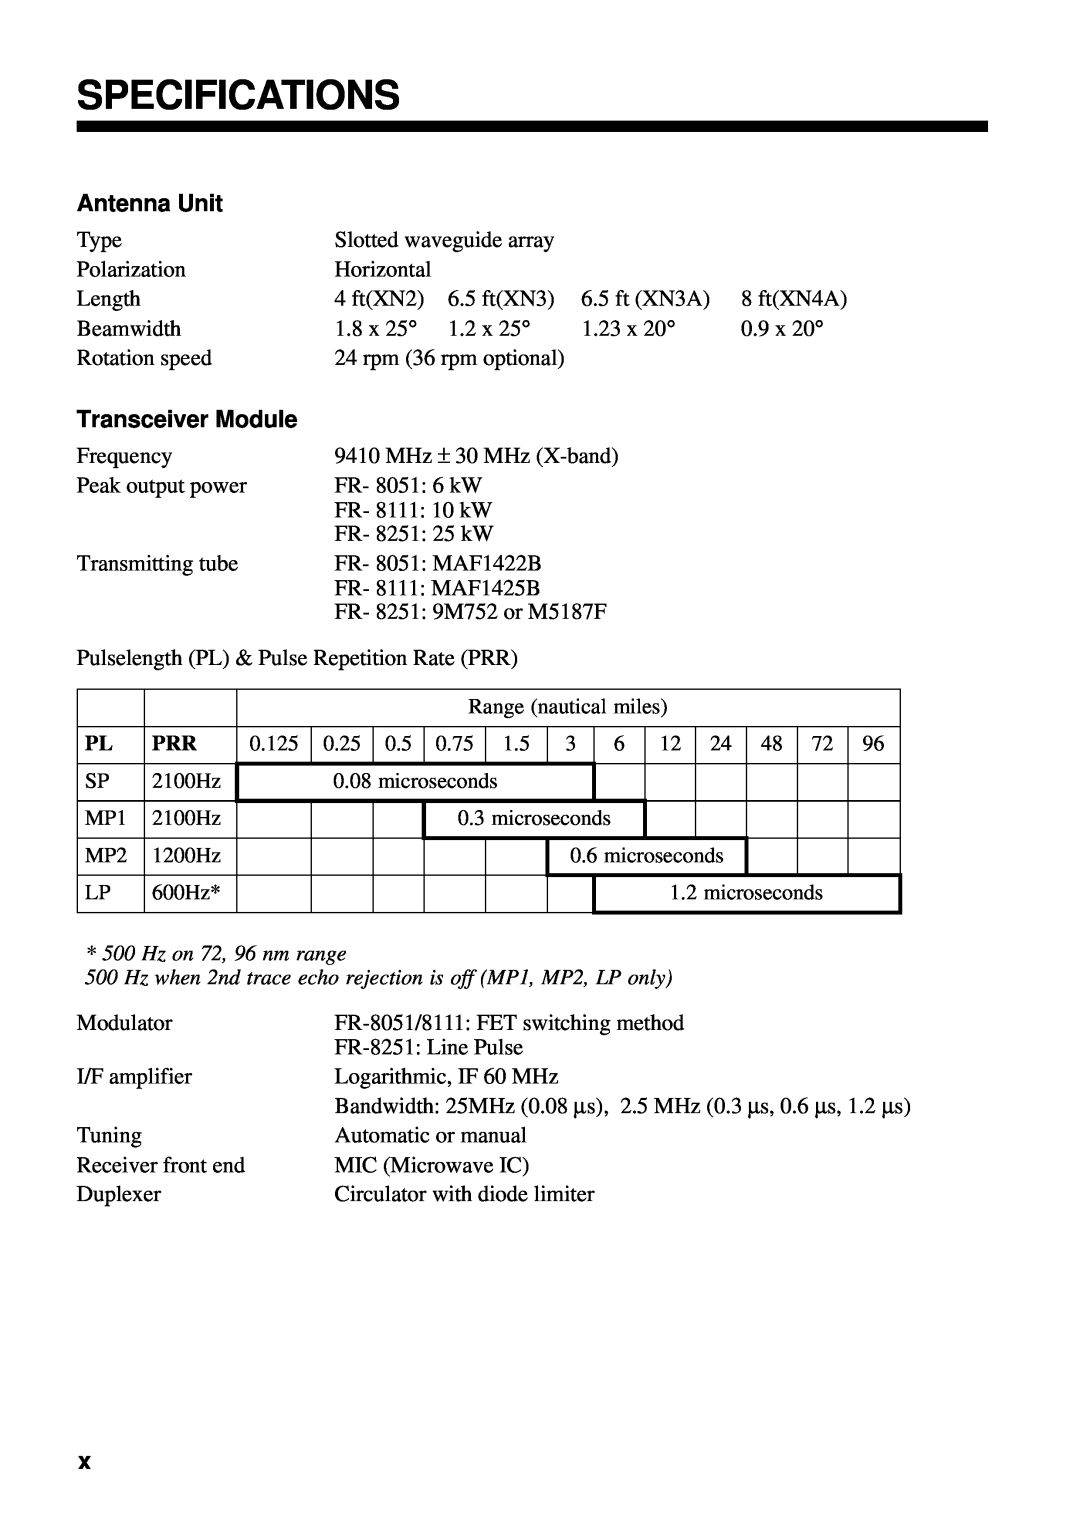 Furuno FR-8251, FR-8111 manual Specifications, Antenna Unit, Transceiver Module 